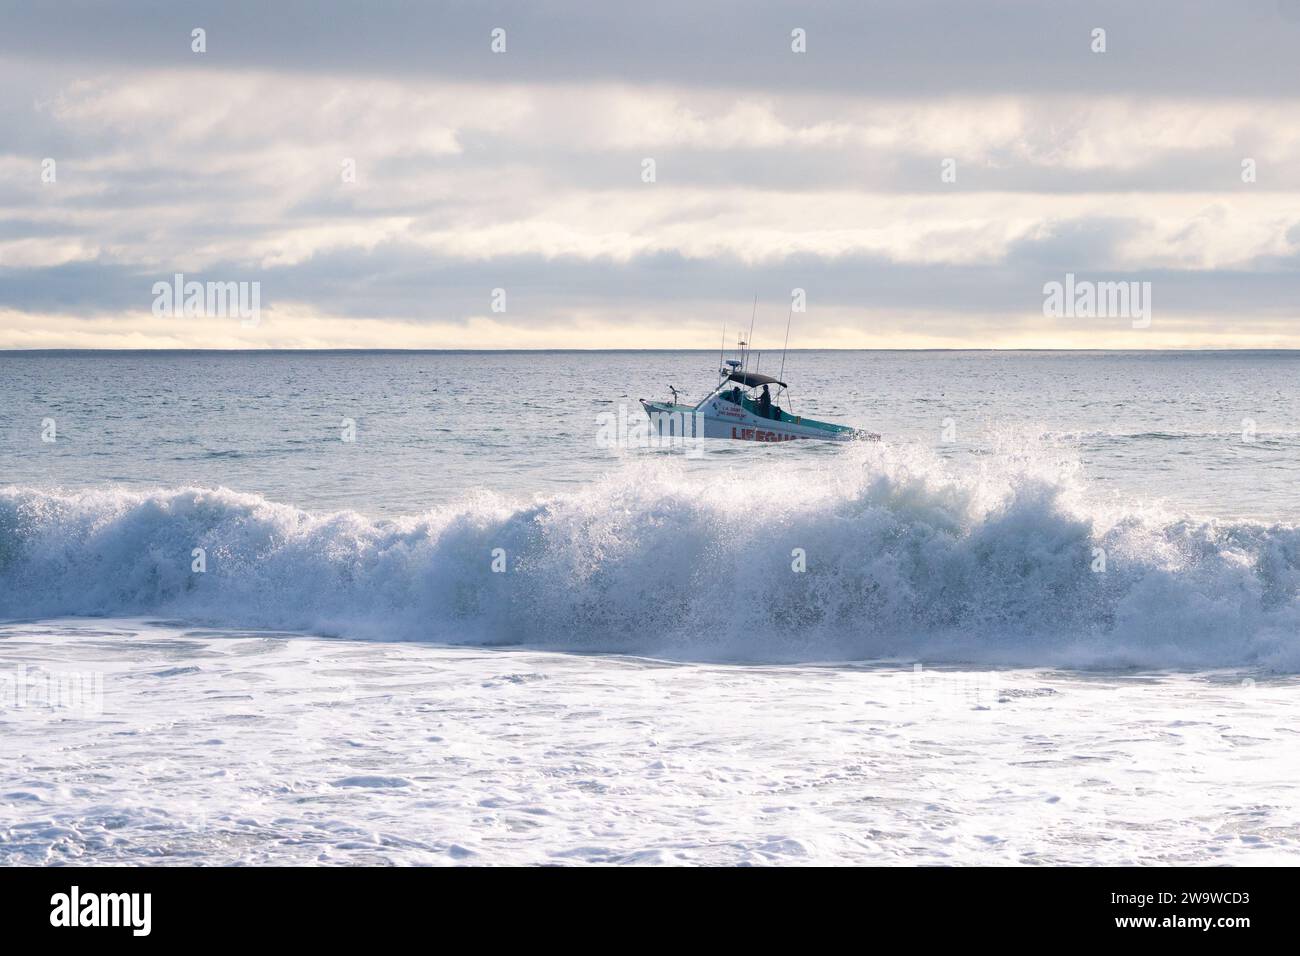 A lifeguard boat patrols the Southern California coastline during high surf conditions at Point Dume beach in Malibu, California USA Stock Photo